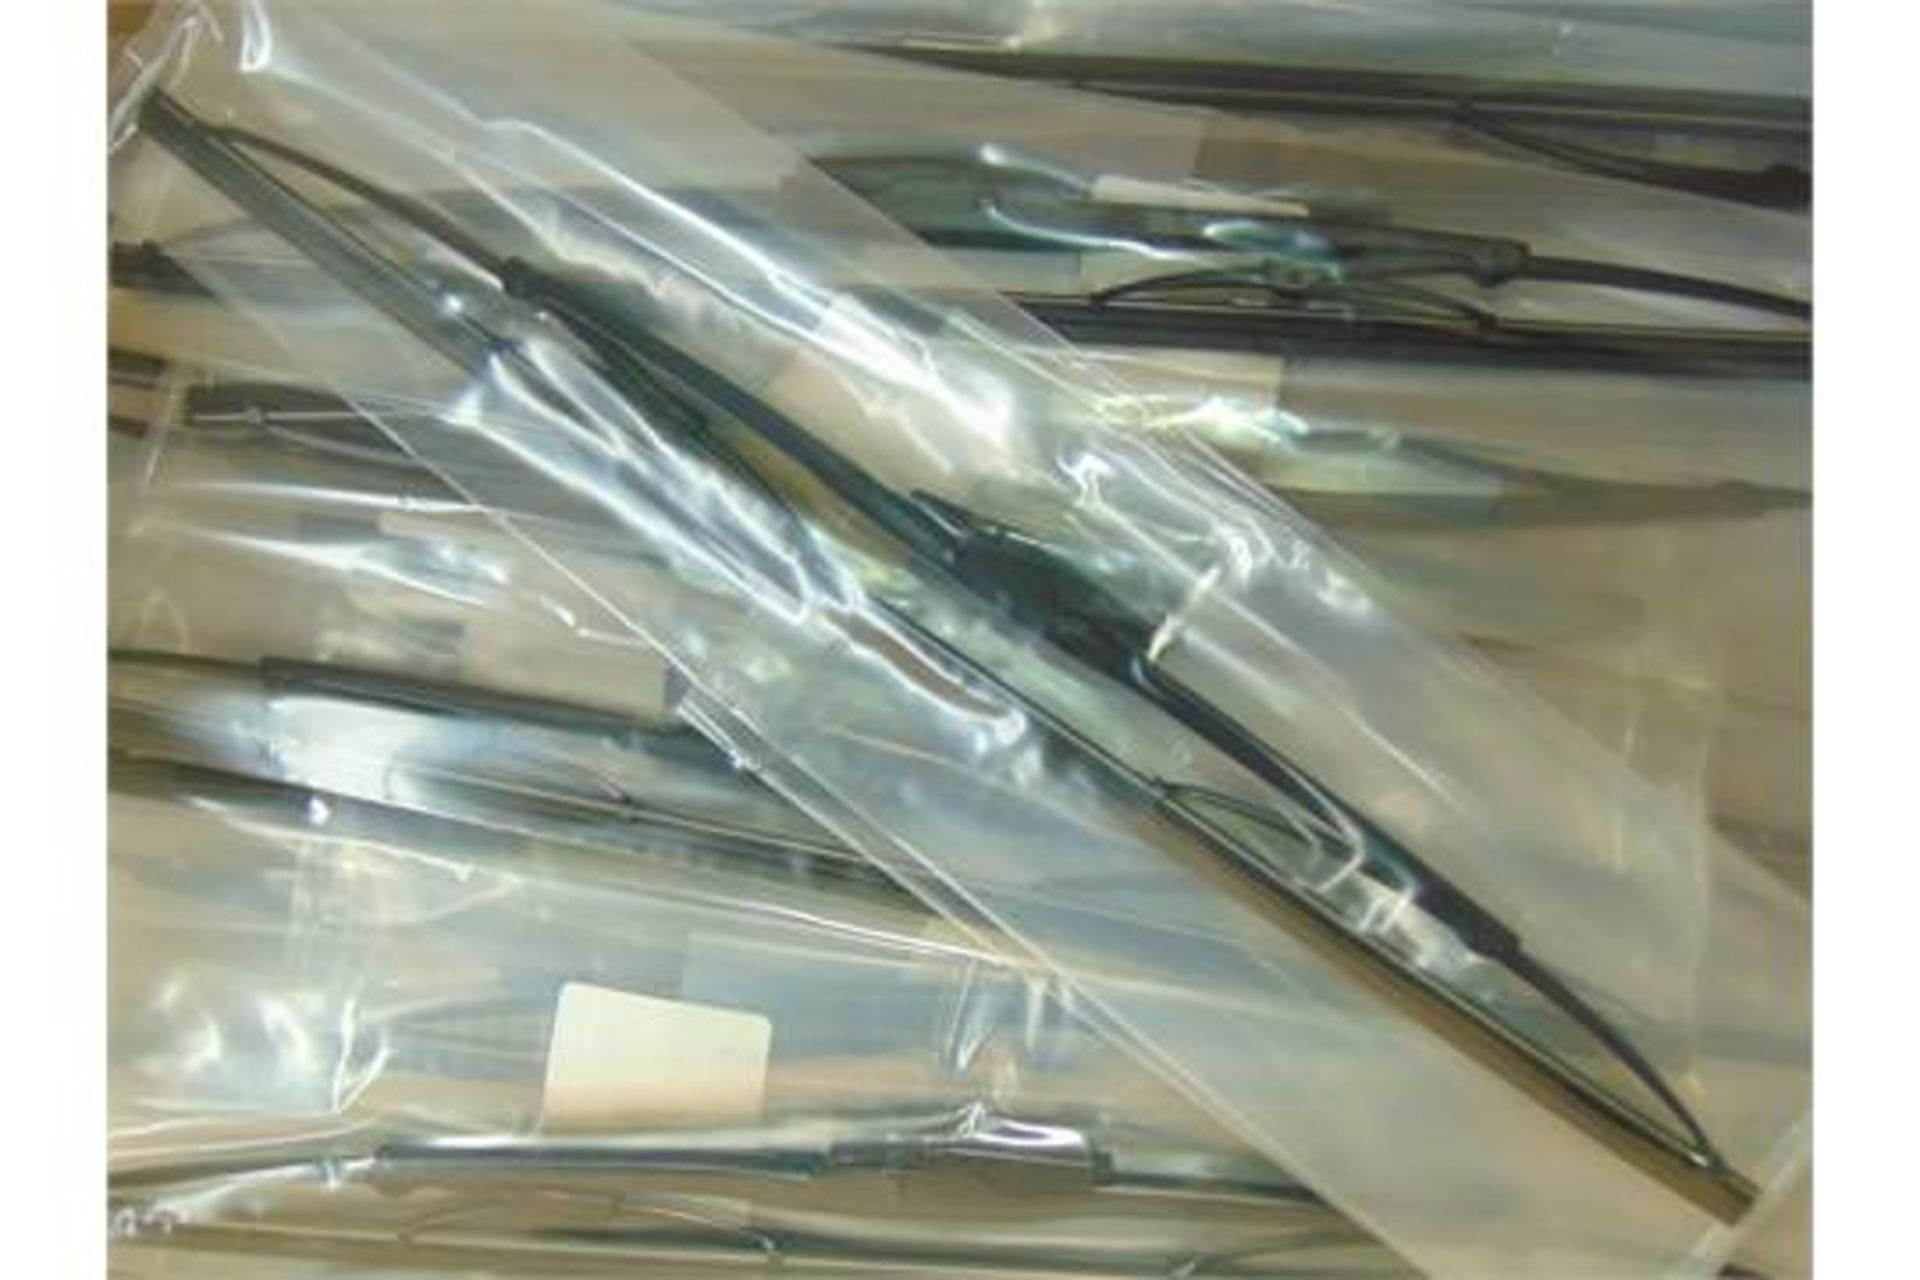 100 x Bedford Wiper Blades - Image 2 of 3